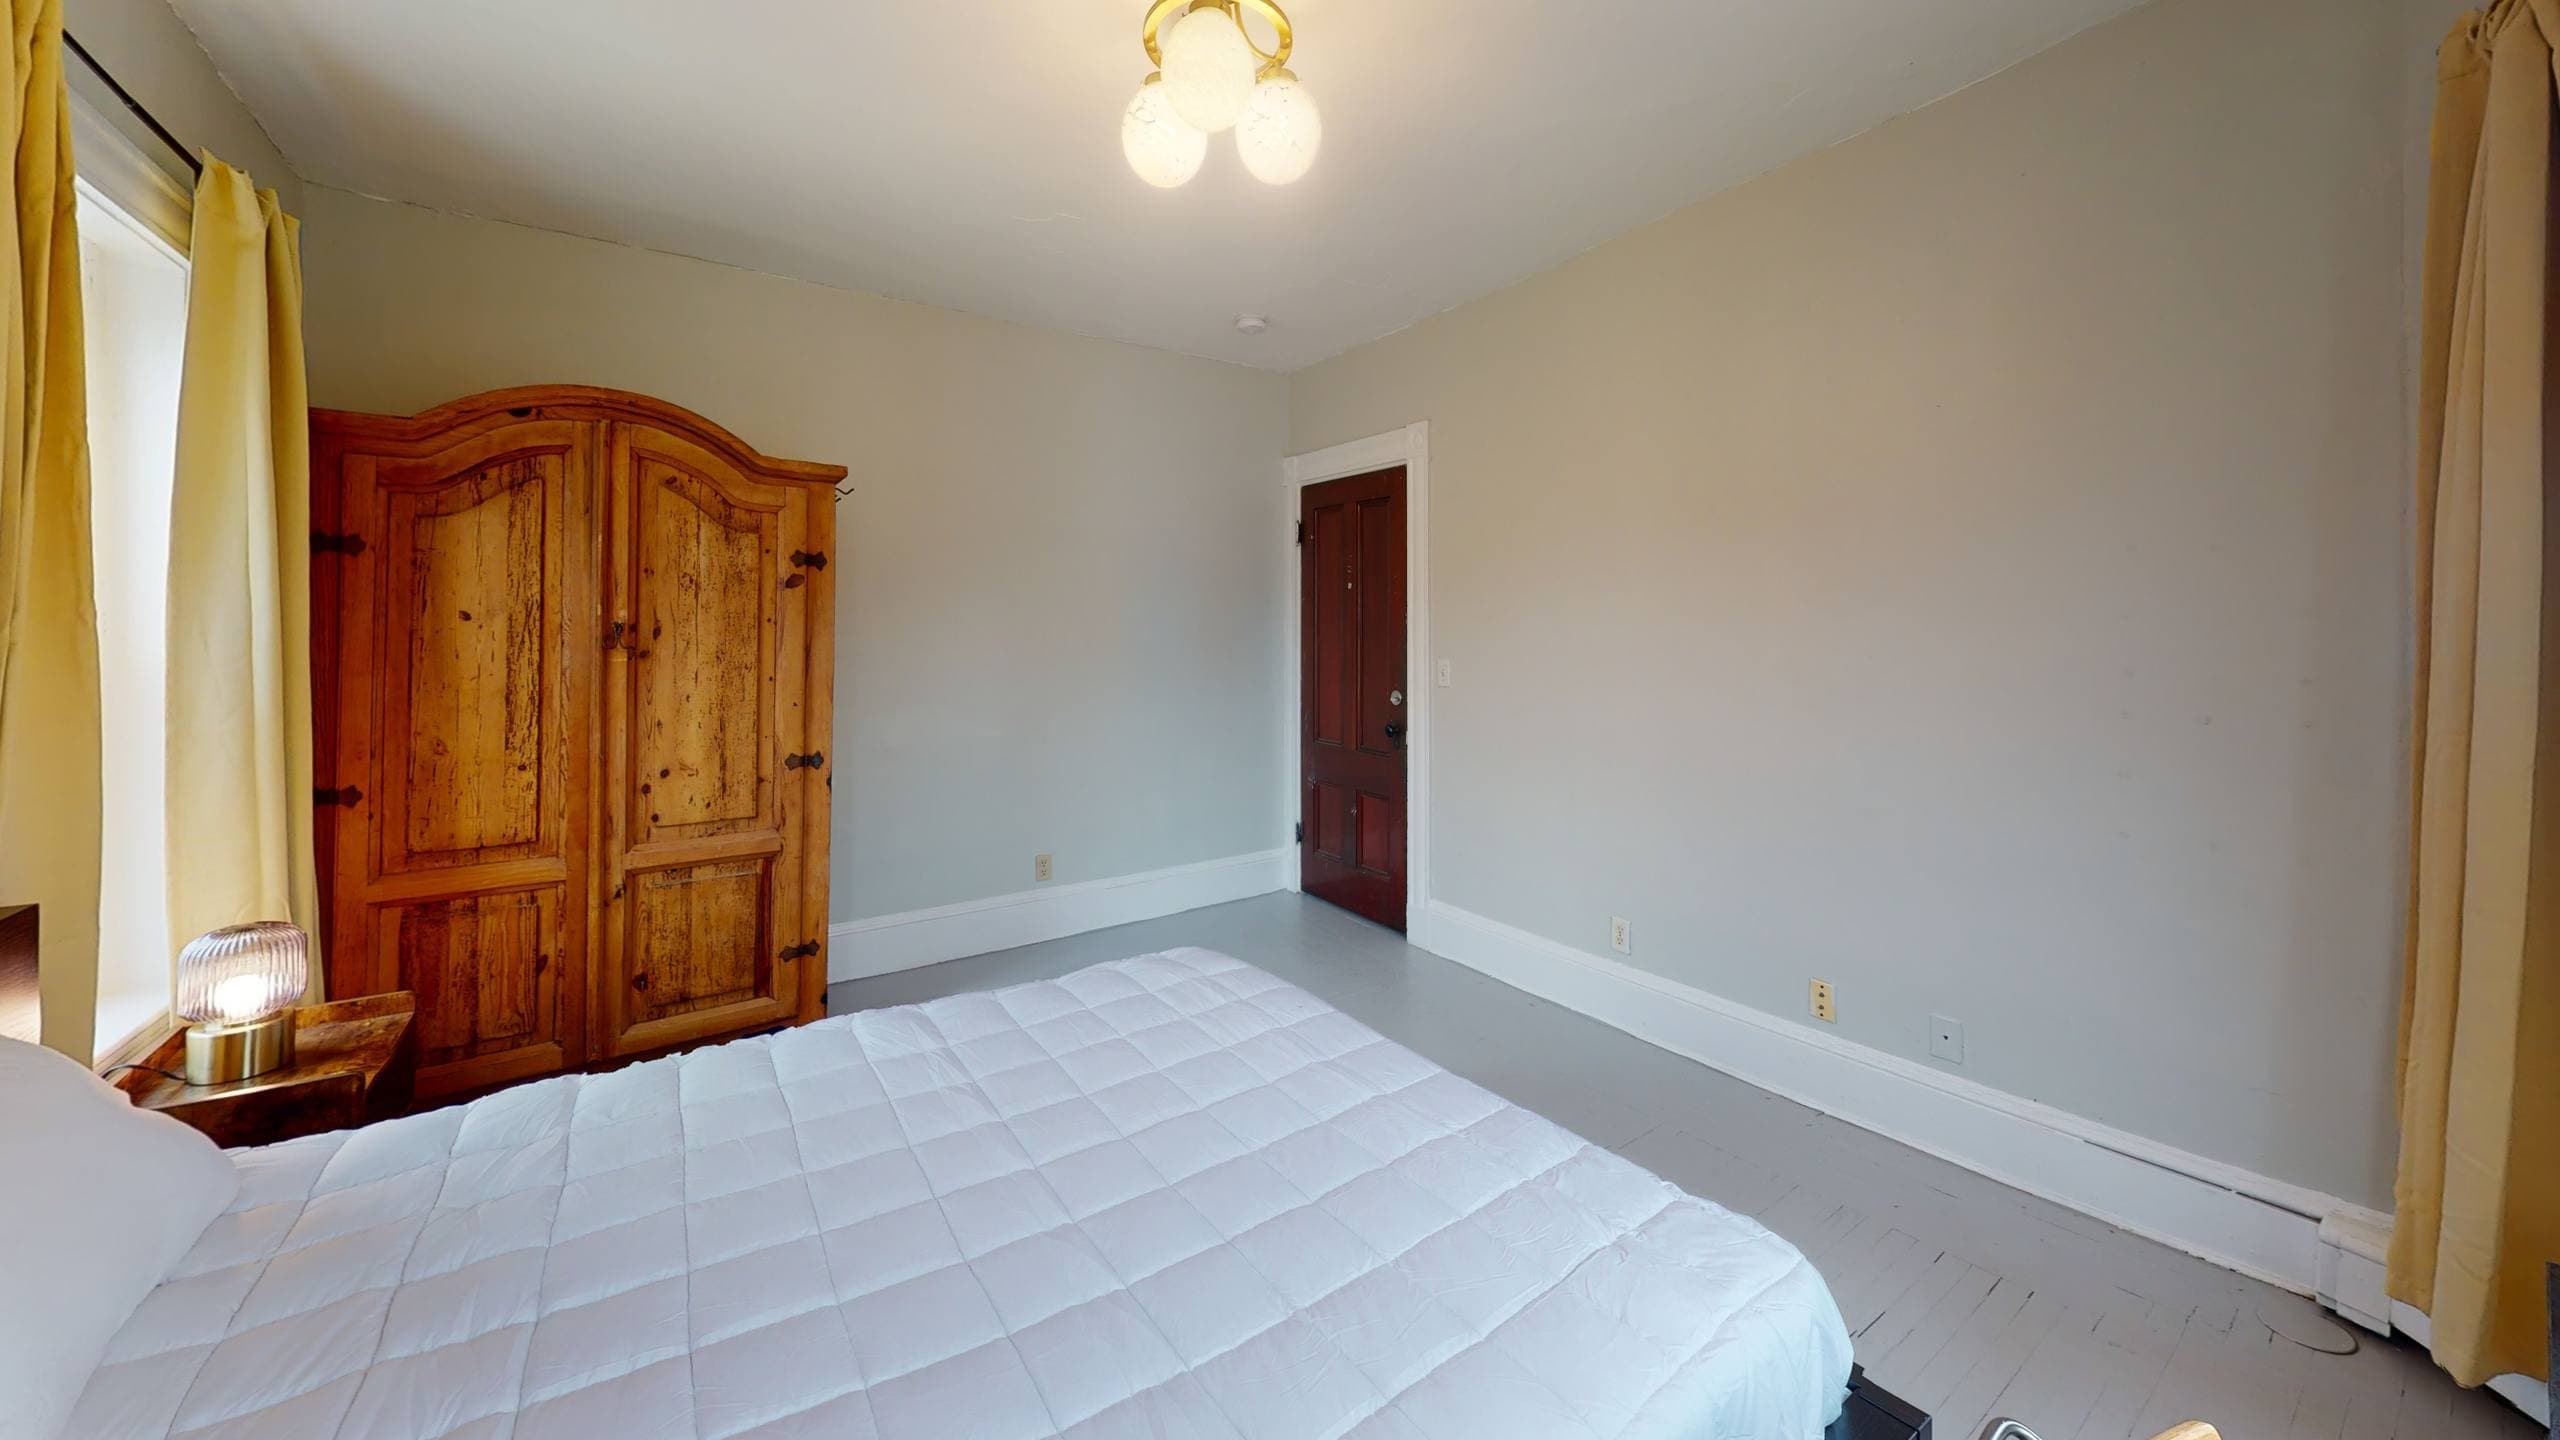 Photo 3 of #1359: Queen Bedroom A at June Homes